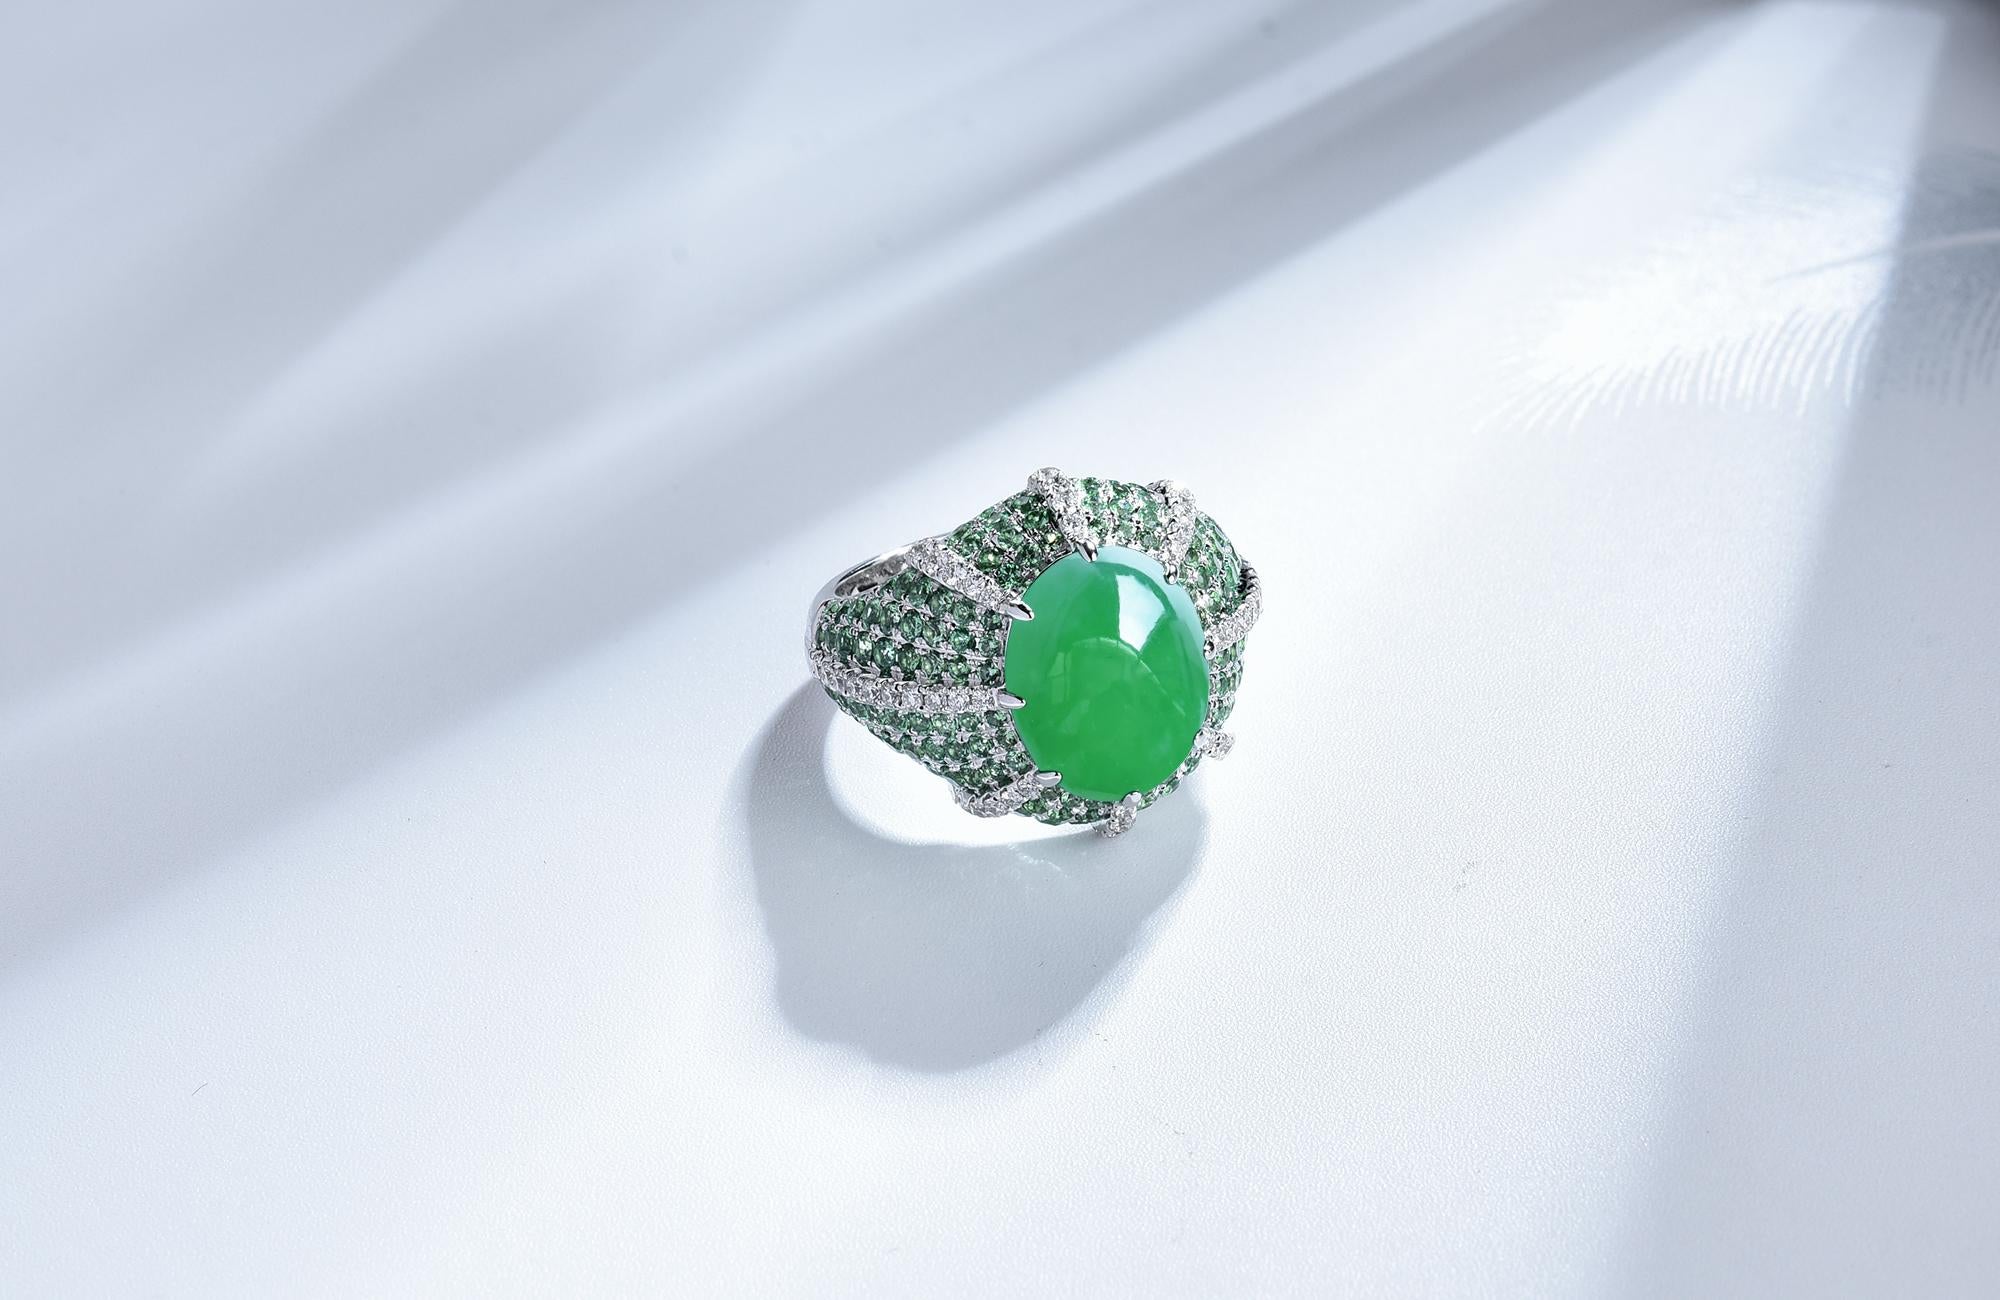 This is a vivid green jadeite cabochon diamond ring. The Jadeite is surrounded by Tsavorite and Diamond pave. The design bears resemblance to the dragon's claws holding the Holy Grail, Enigmatic yet modern. In order to stand out from the Tsavorite